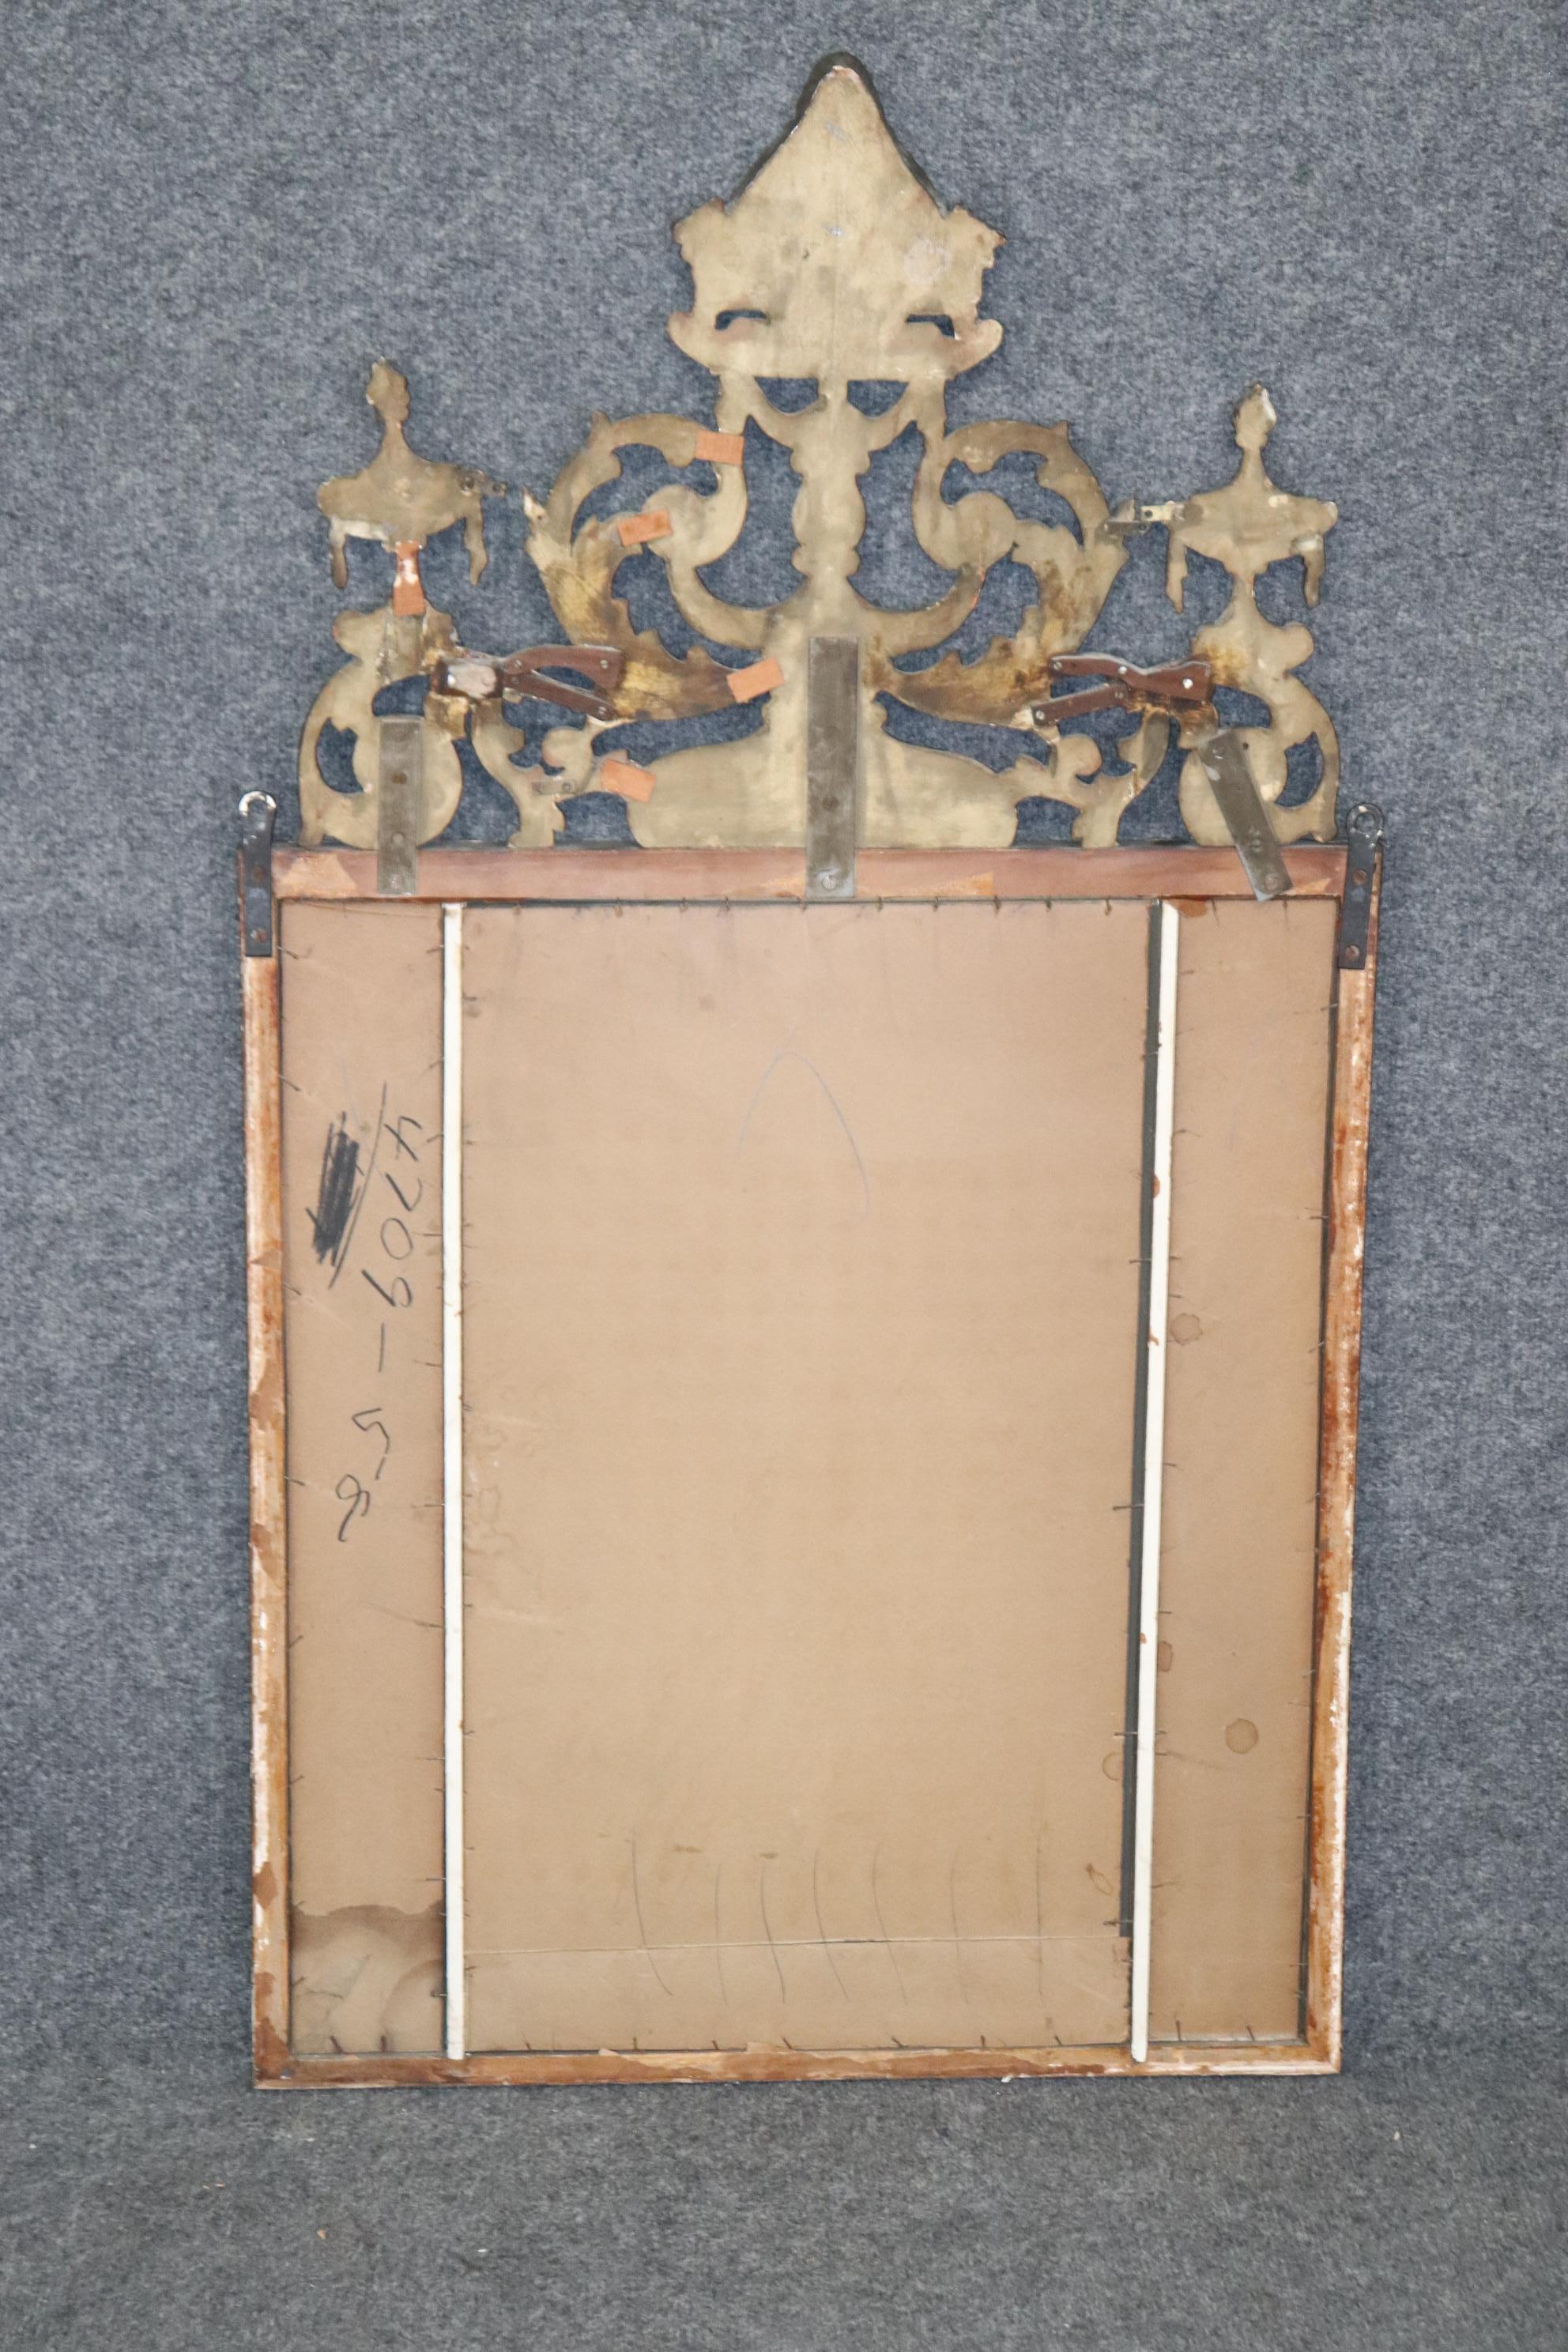 Dimensions- H:47 1/2n W: 26 1/4in D: 2in

This French Regency style carved wood and gesso mirror is made of the highest quality and is perfect for you and your home! If you look at the photos provided you'll see the detail in the carvings on the